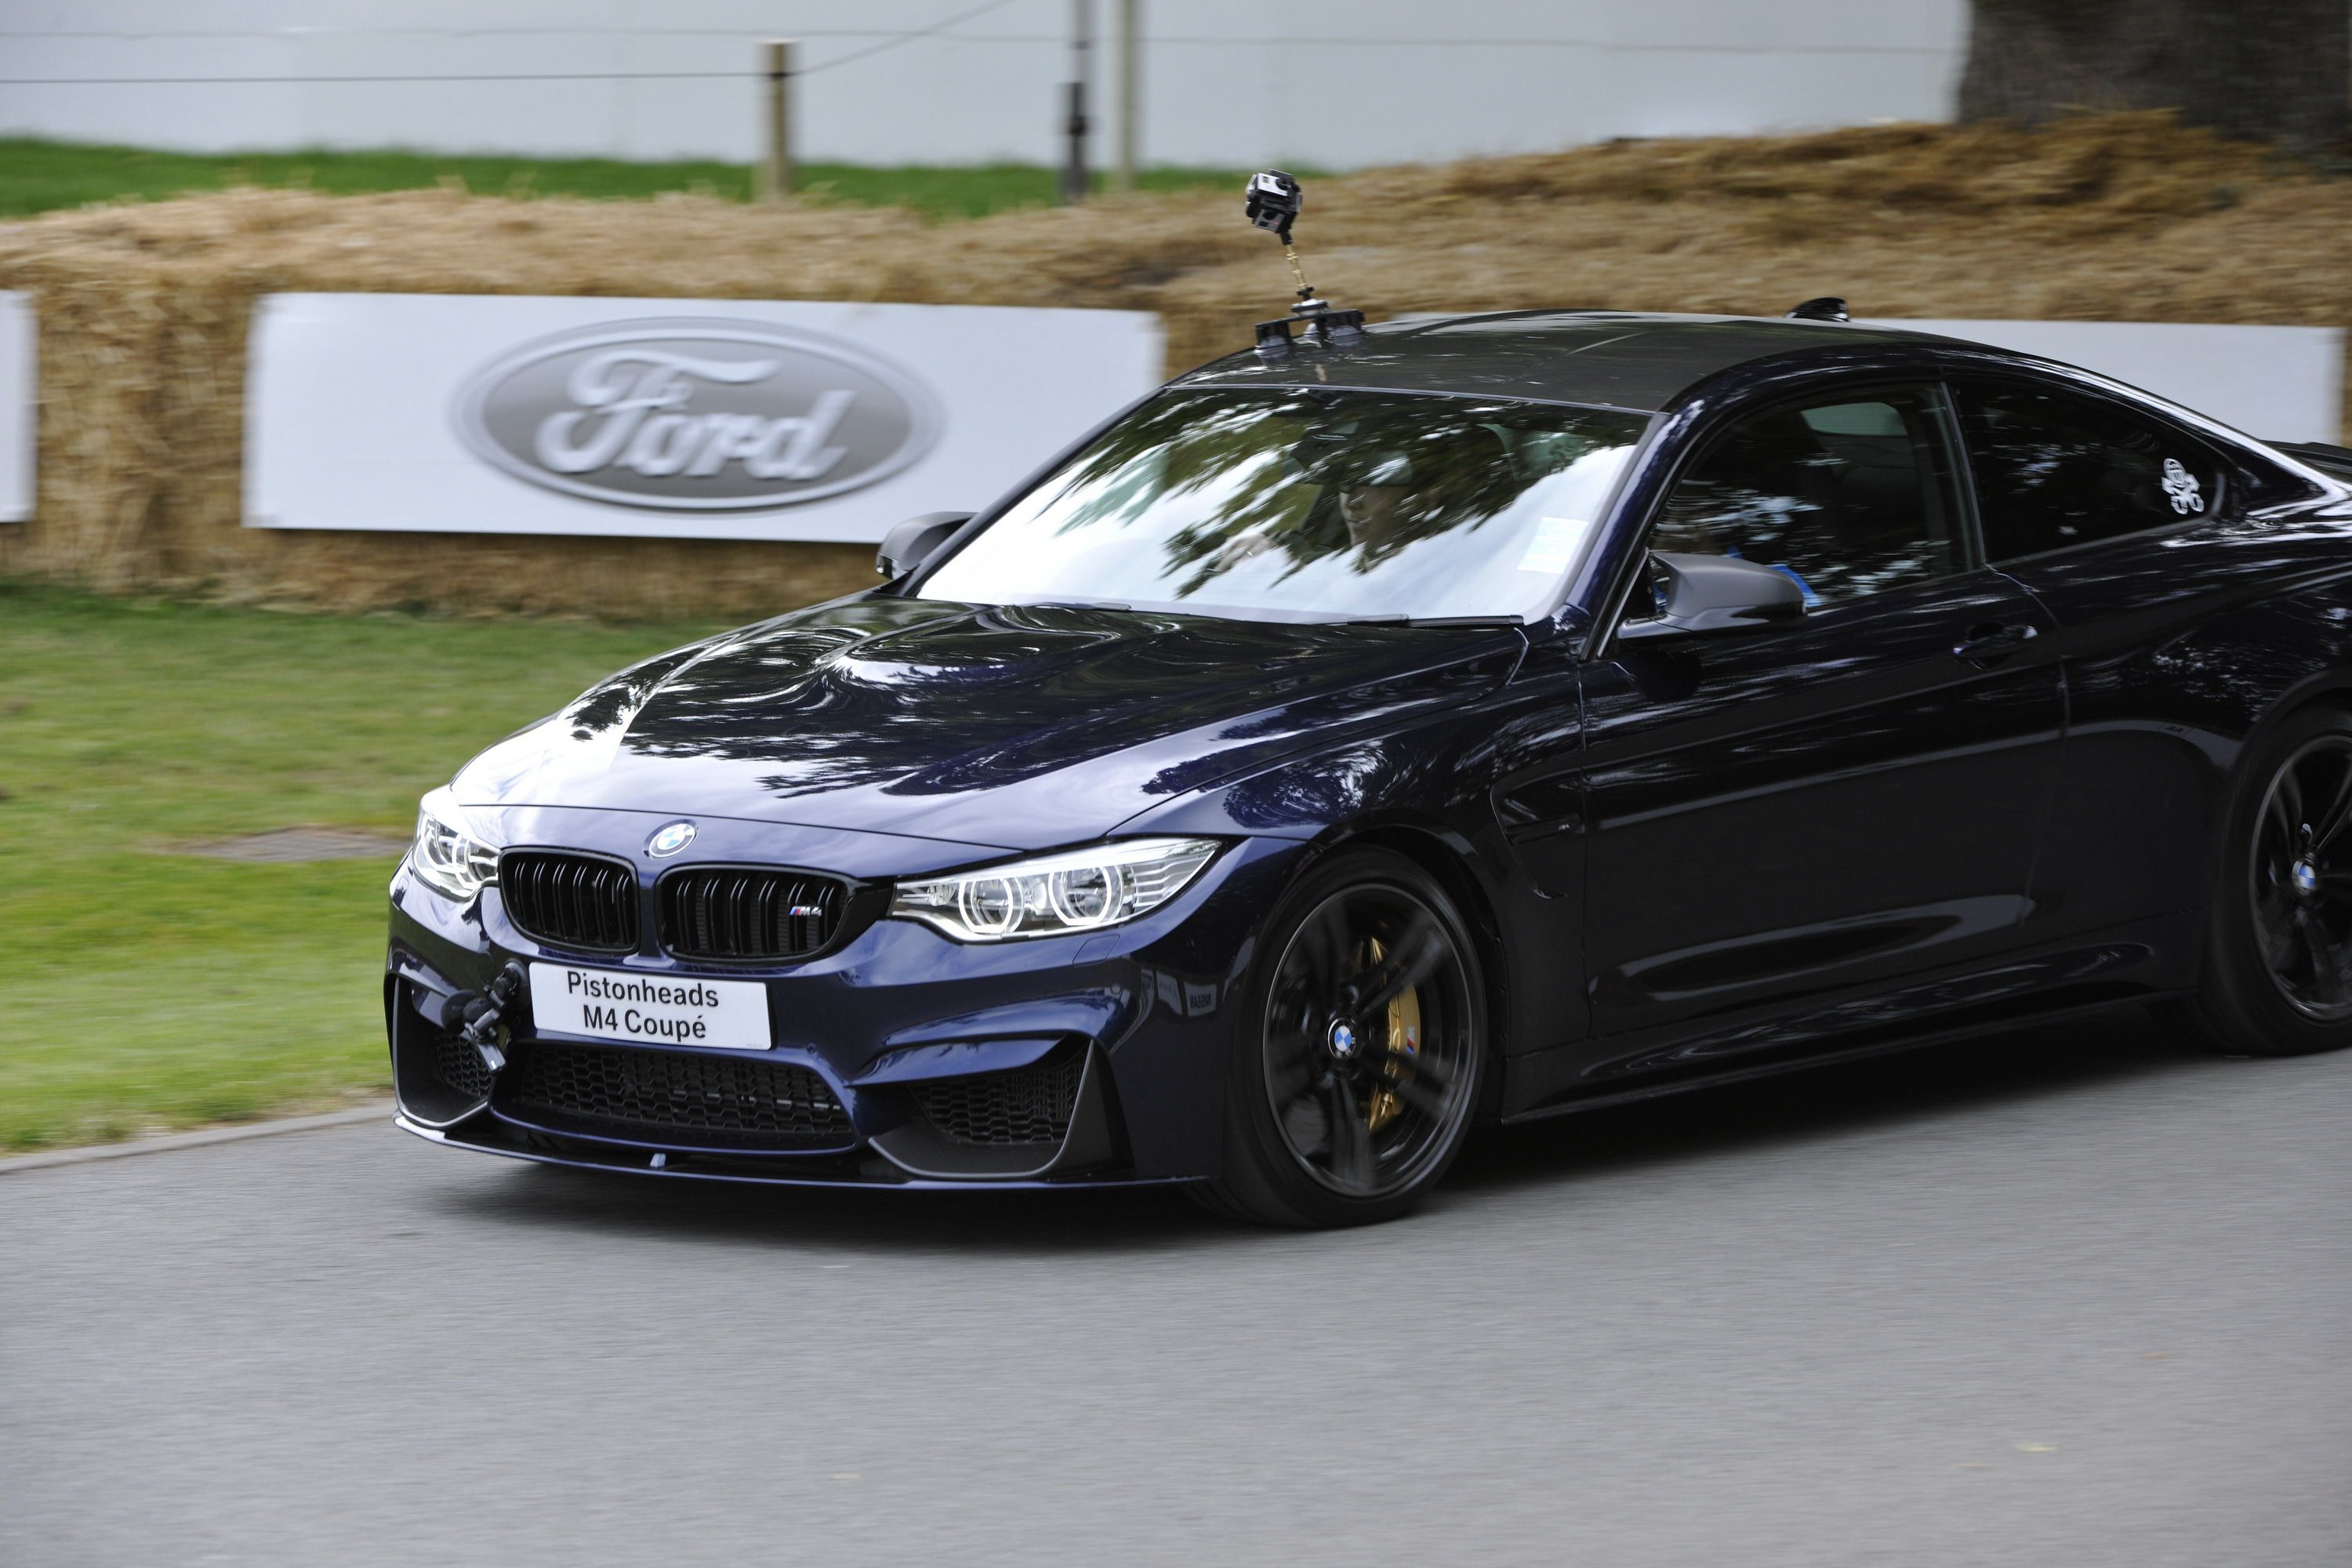 2015 BMW Individual M4 Coupe Pistonheads Edition